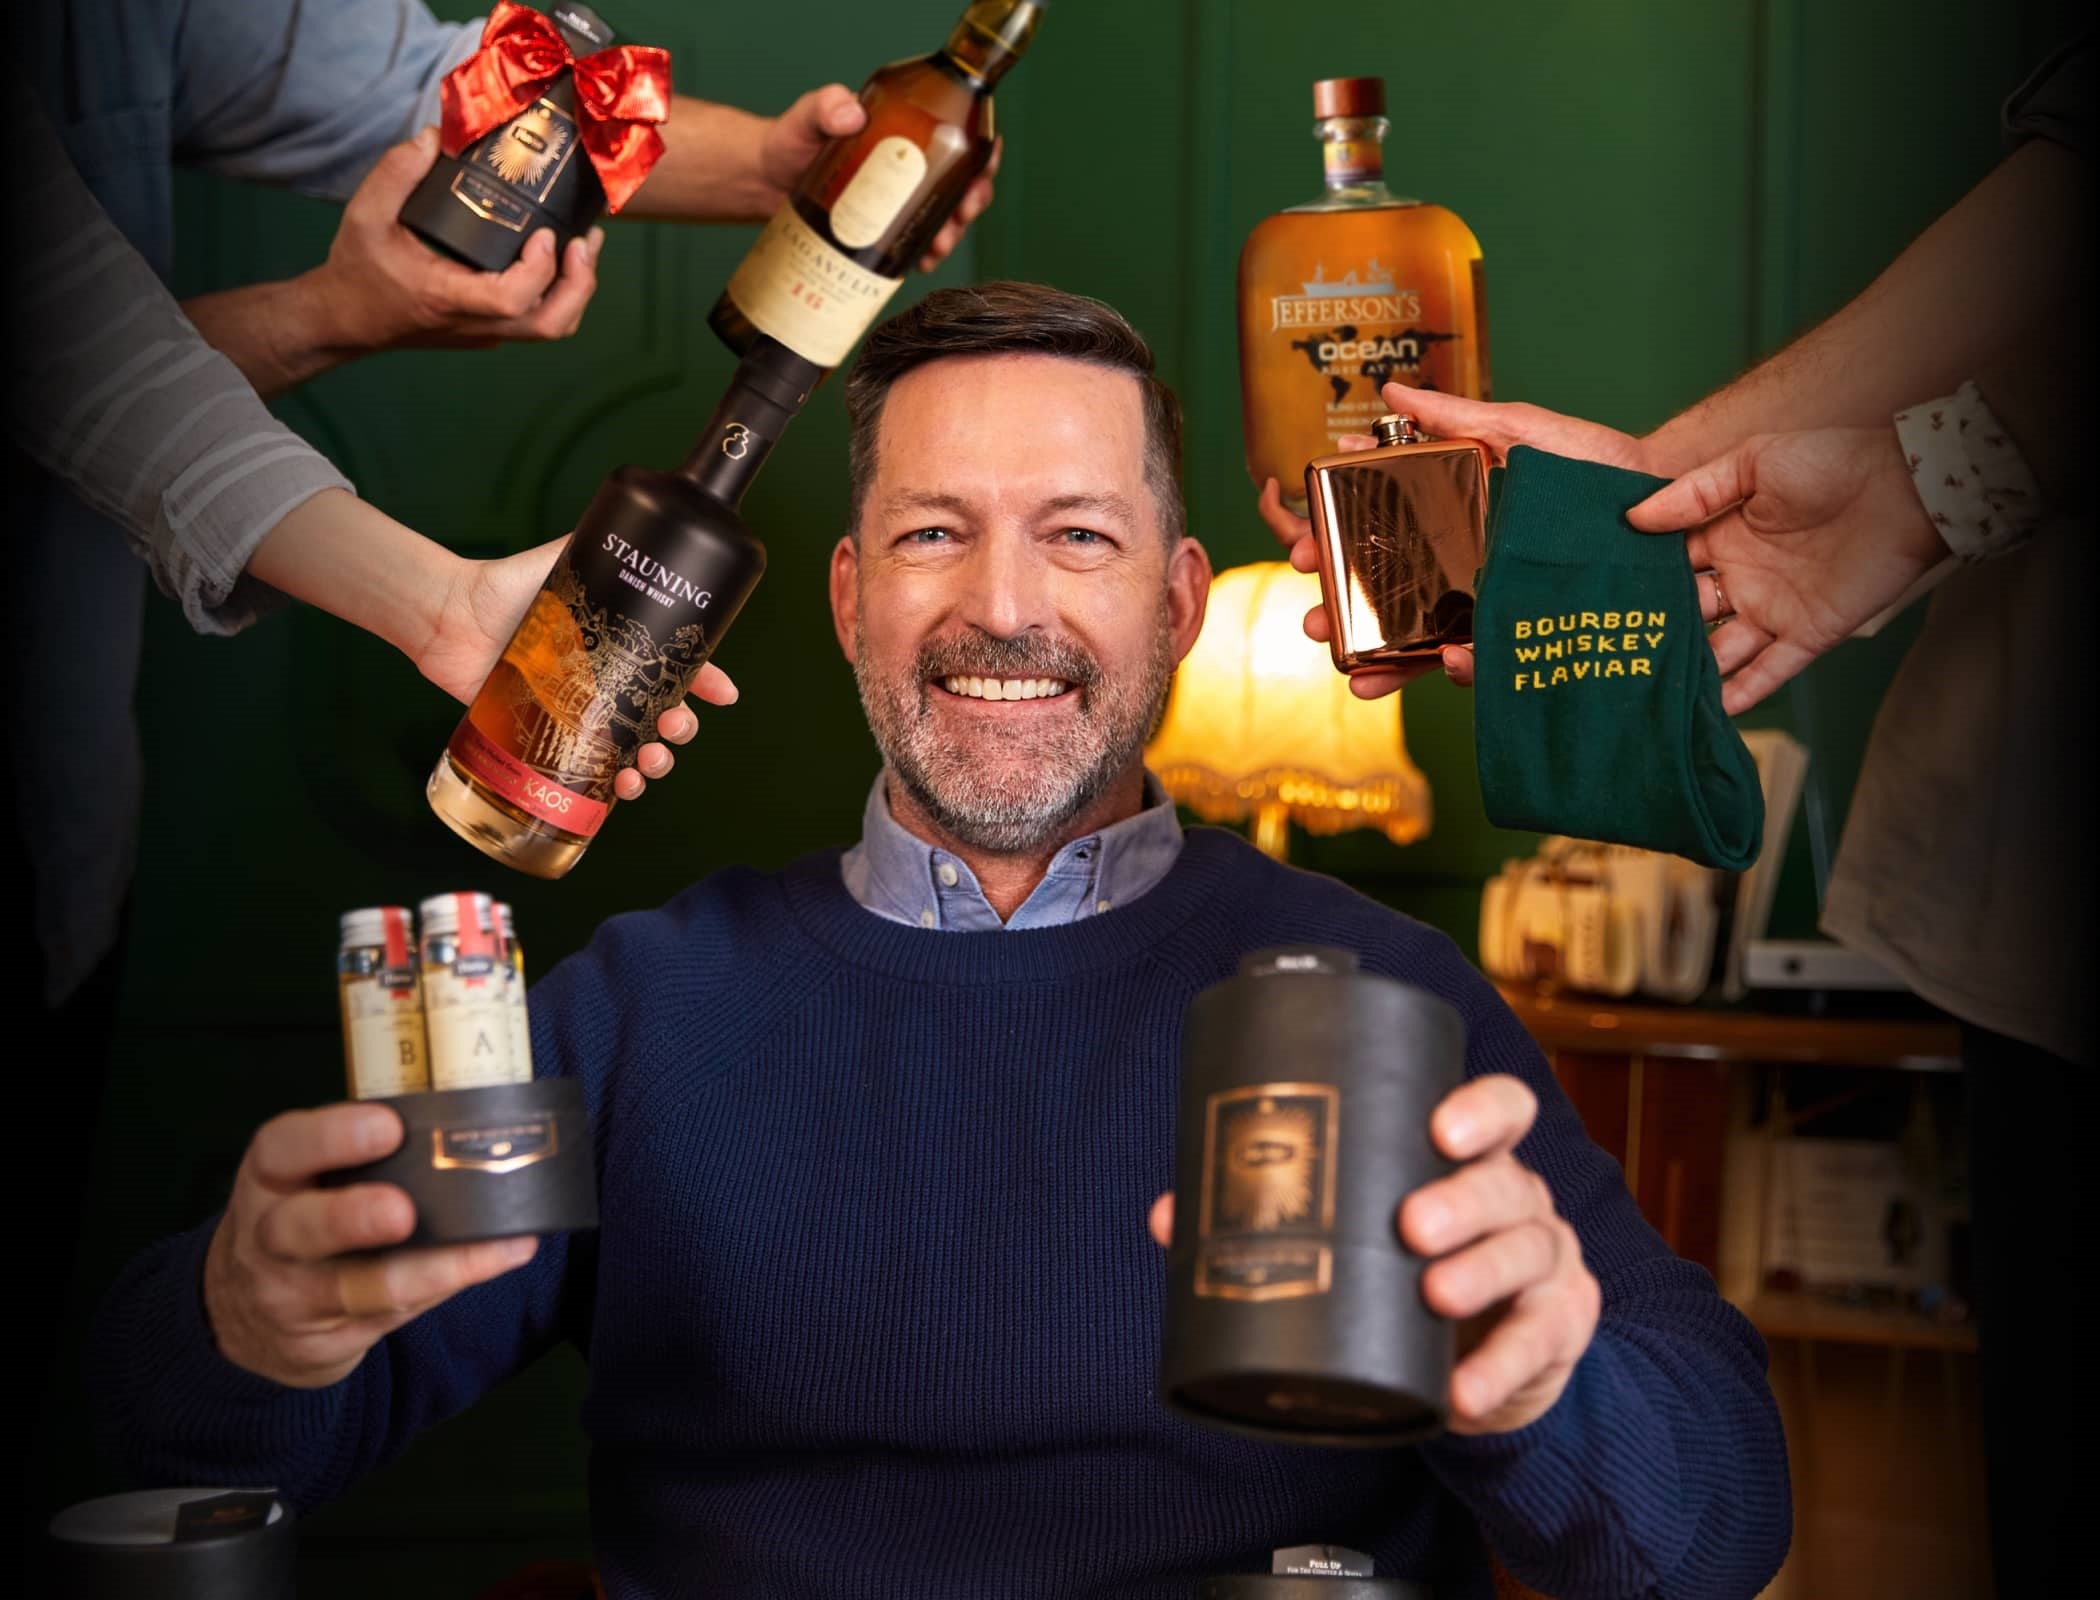 Give your best whisky gift yet